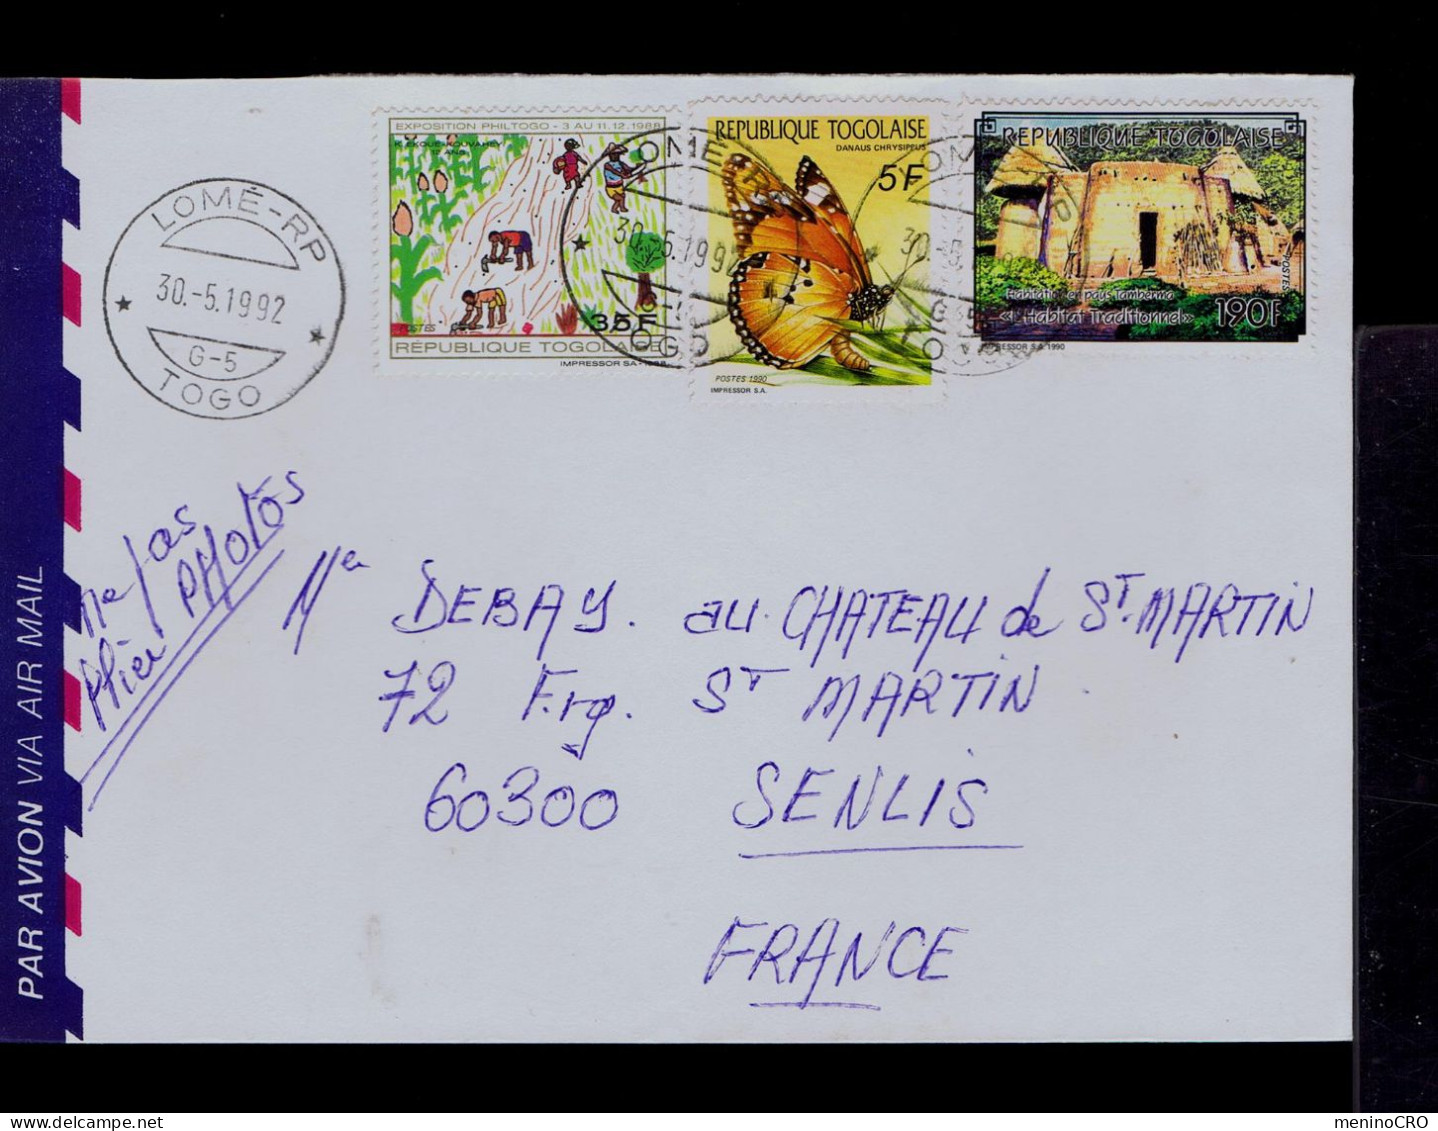 Gc8493 Rep. TOGOLAISE Butterflies Papillons Insectes Agriculture Typical Habitat Traditioneel  Mailed LOMÉ-RP »SENLIS - Agricoltura